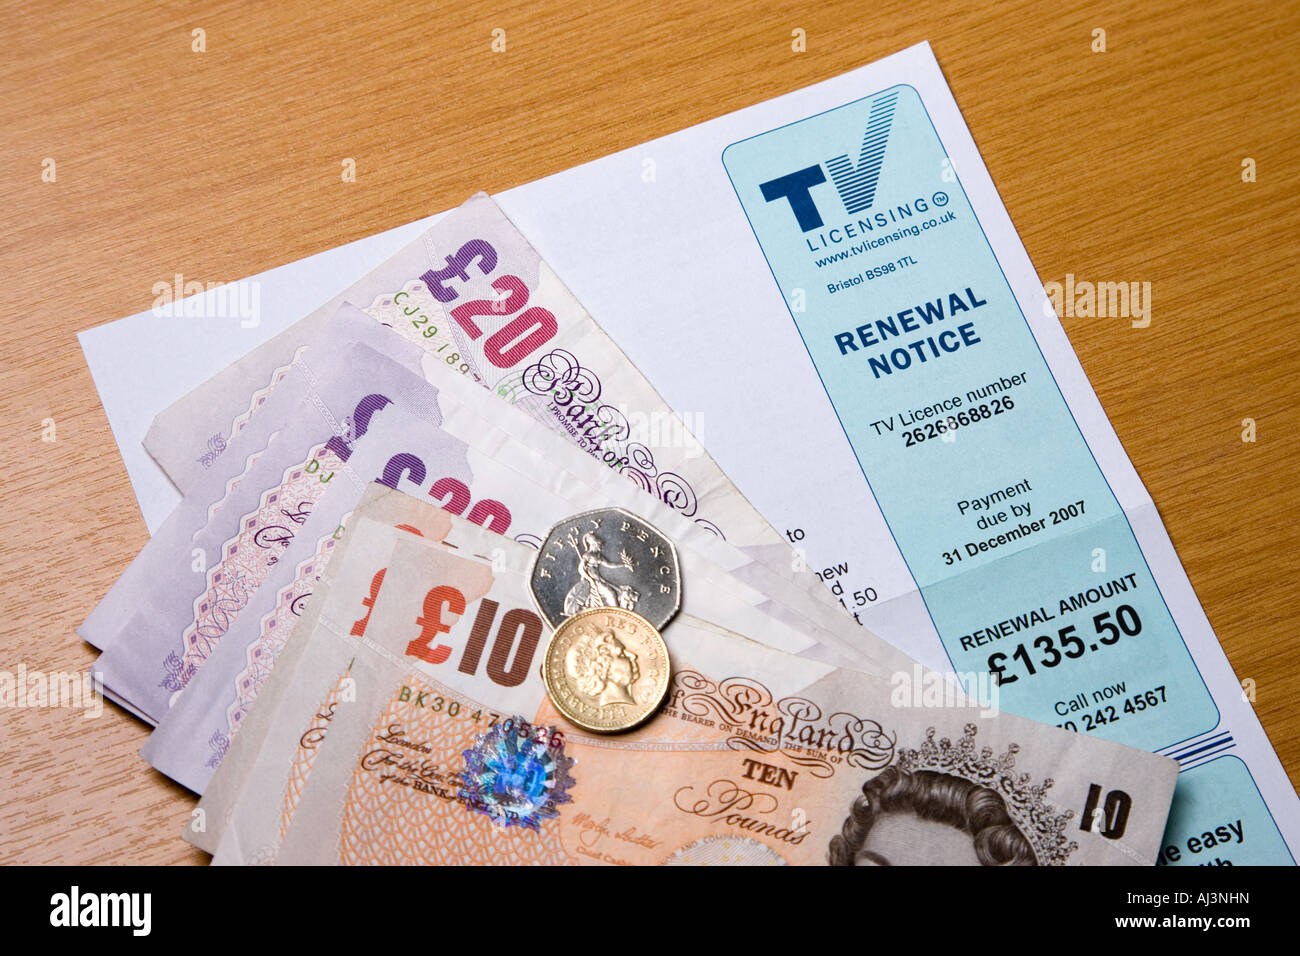 A television licence application form with cash to pay for it Stock Photo